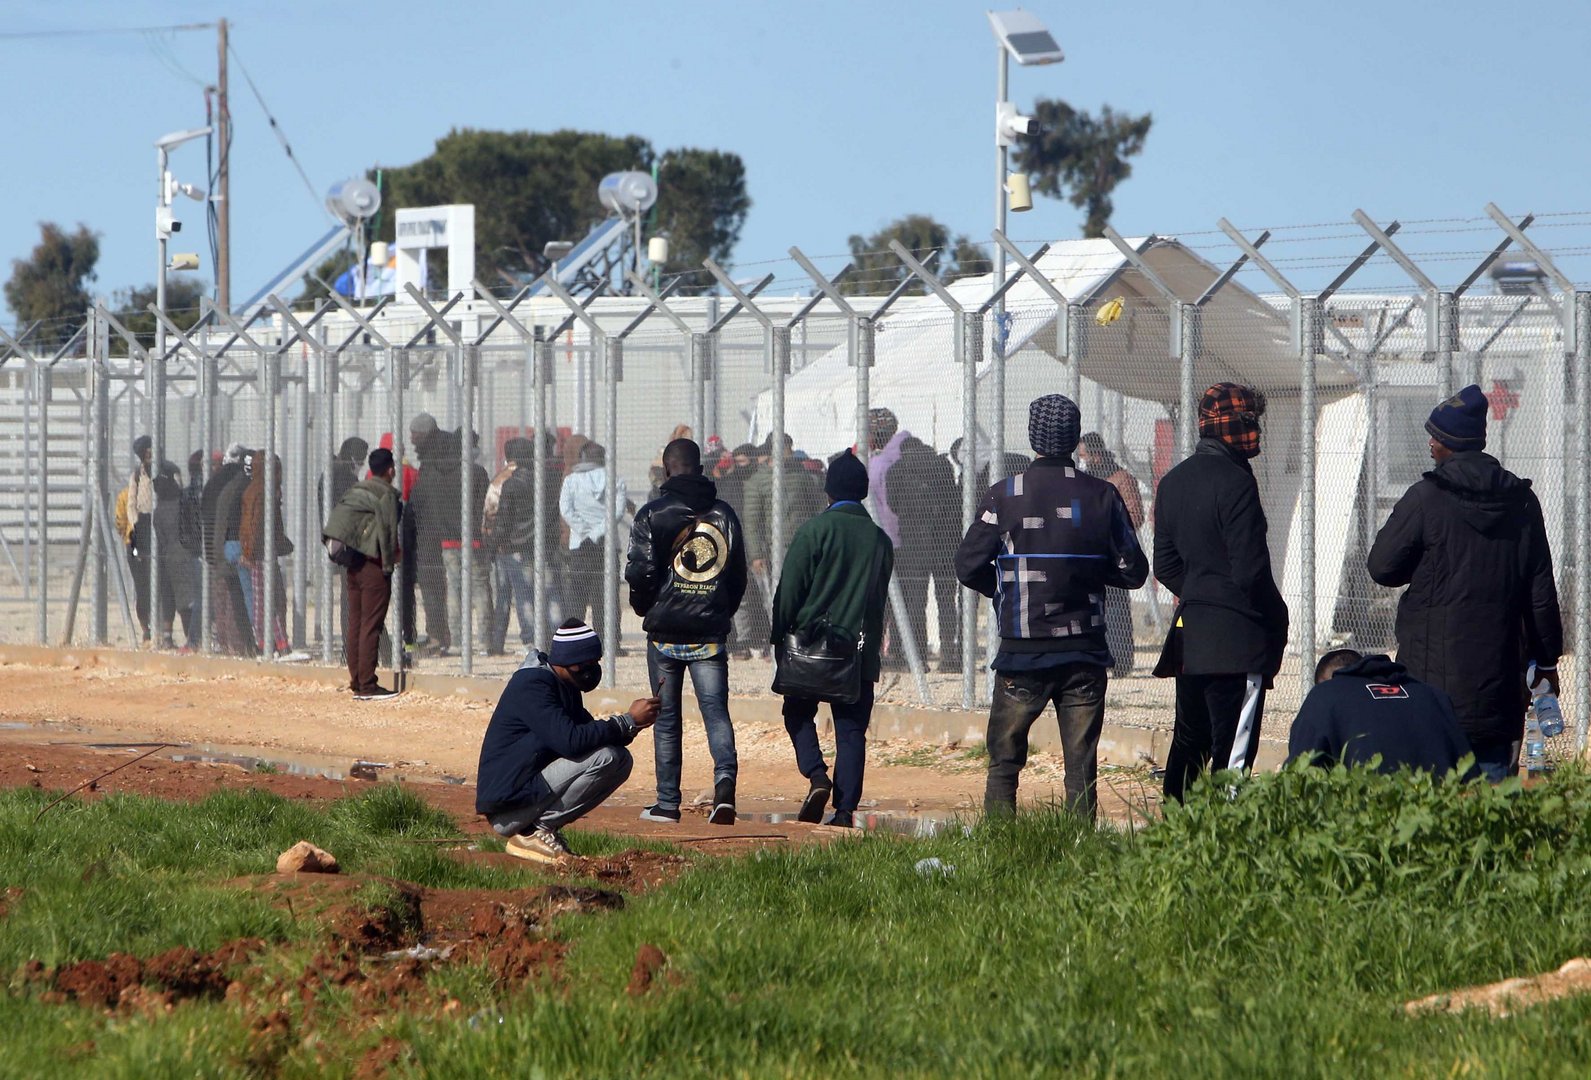 cover ‘Inhuman and degrading treatment of migrants in Cyprus’